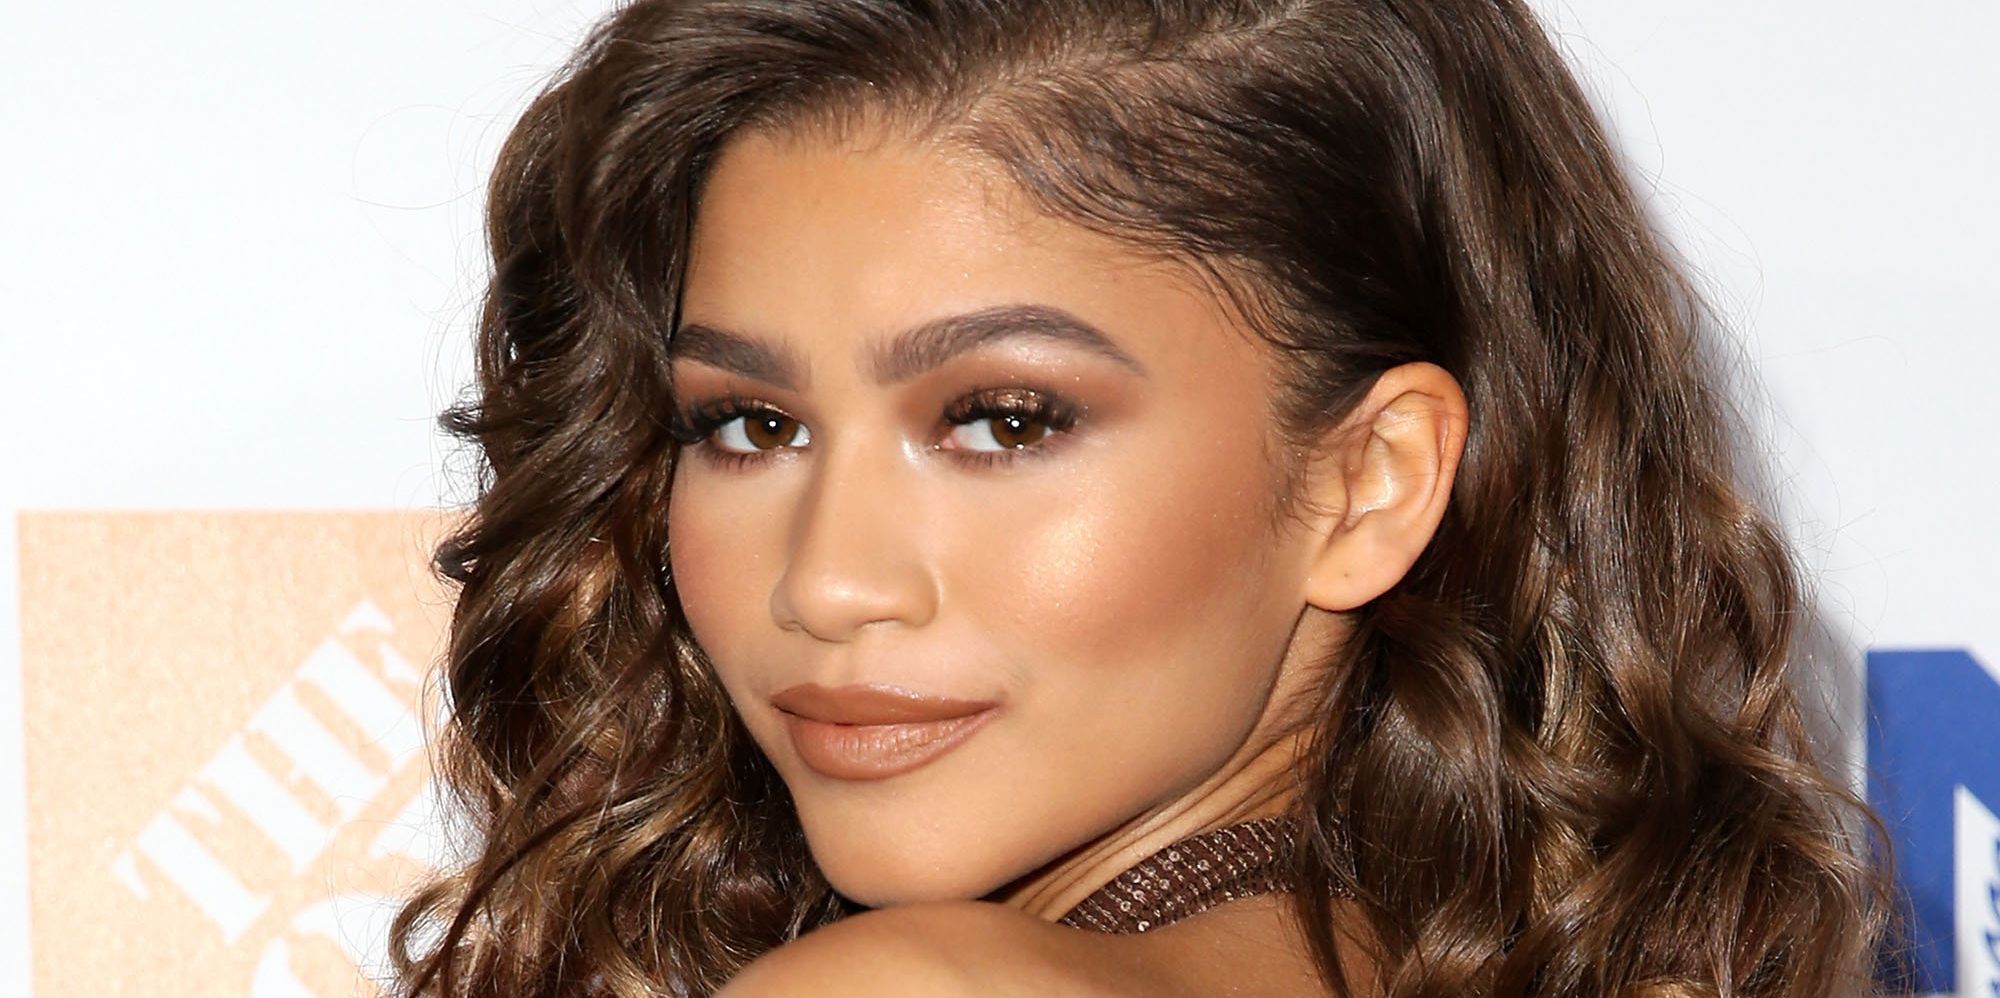 Zendaya Is The New Face Of CoverGirl | The Huffington Post